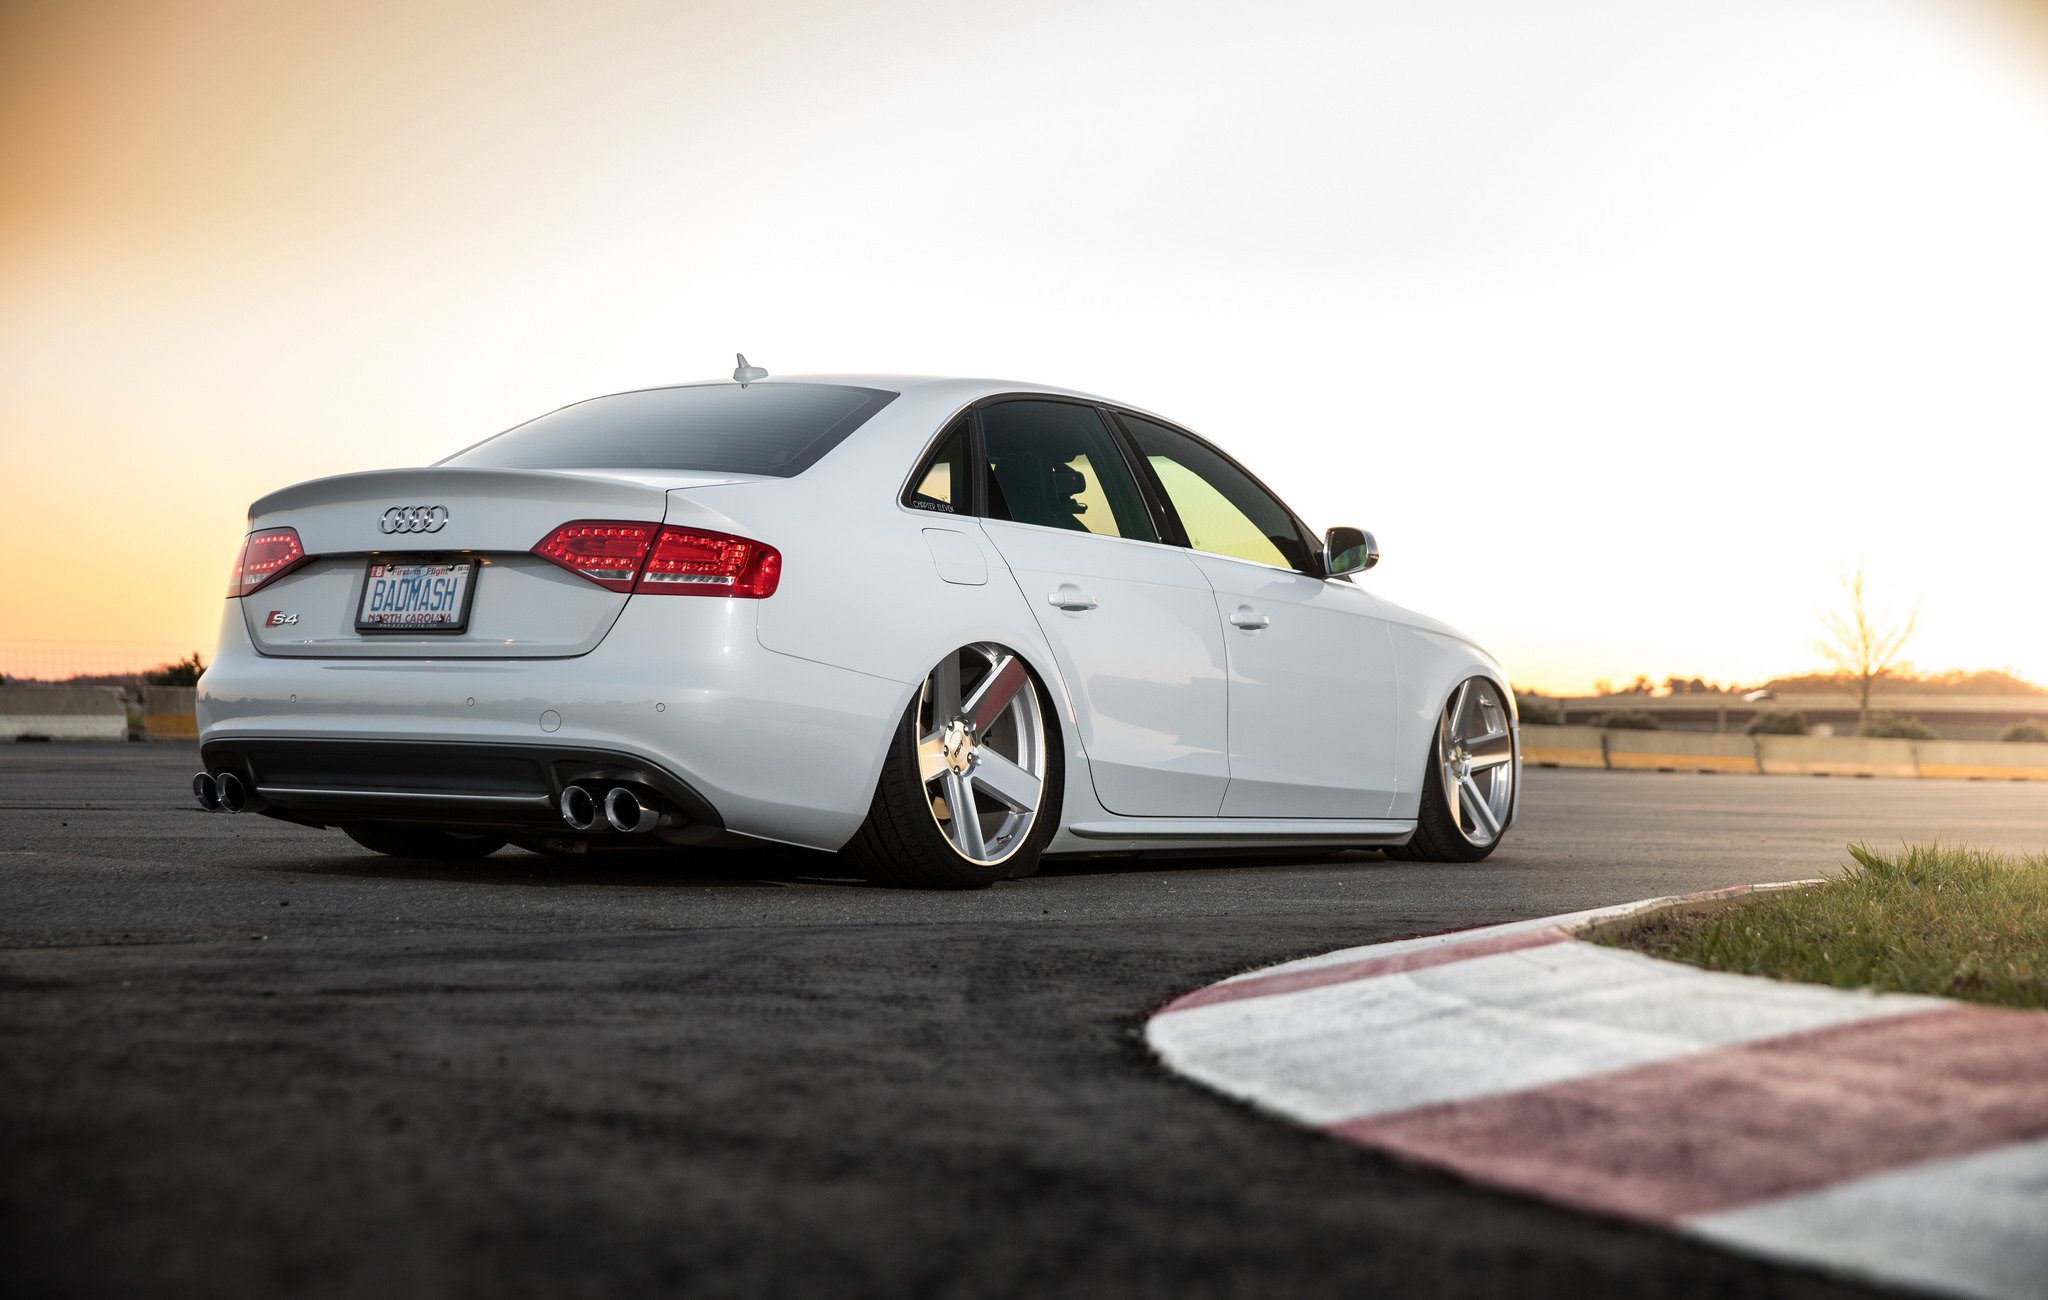 White Lowered Audi S4 with Red LED Taillights - Photo by TSW